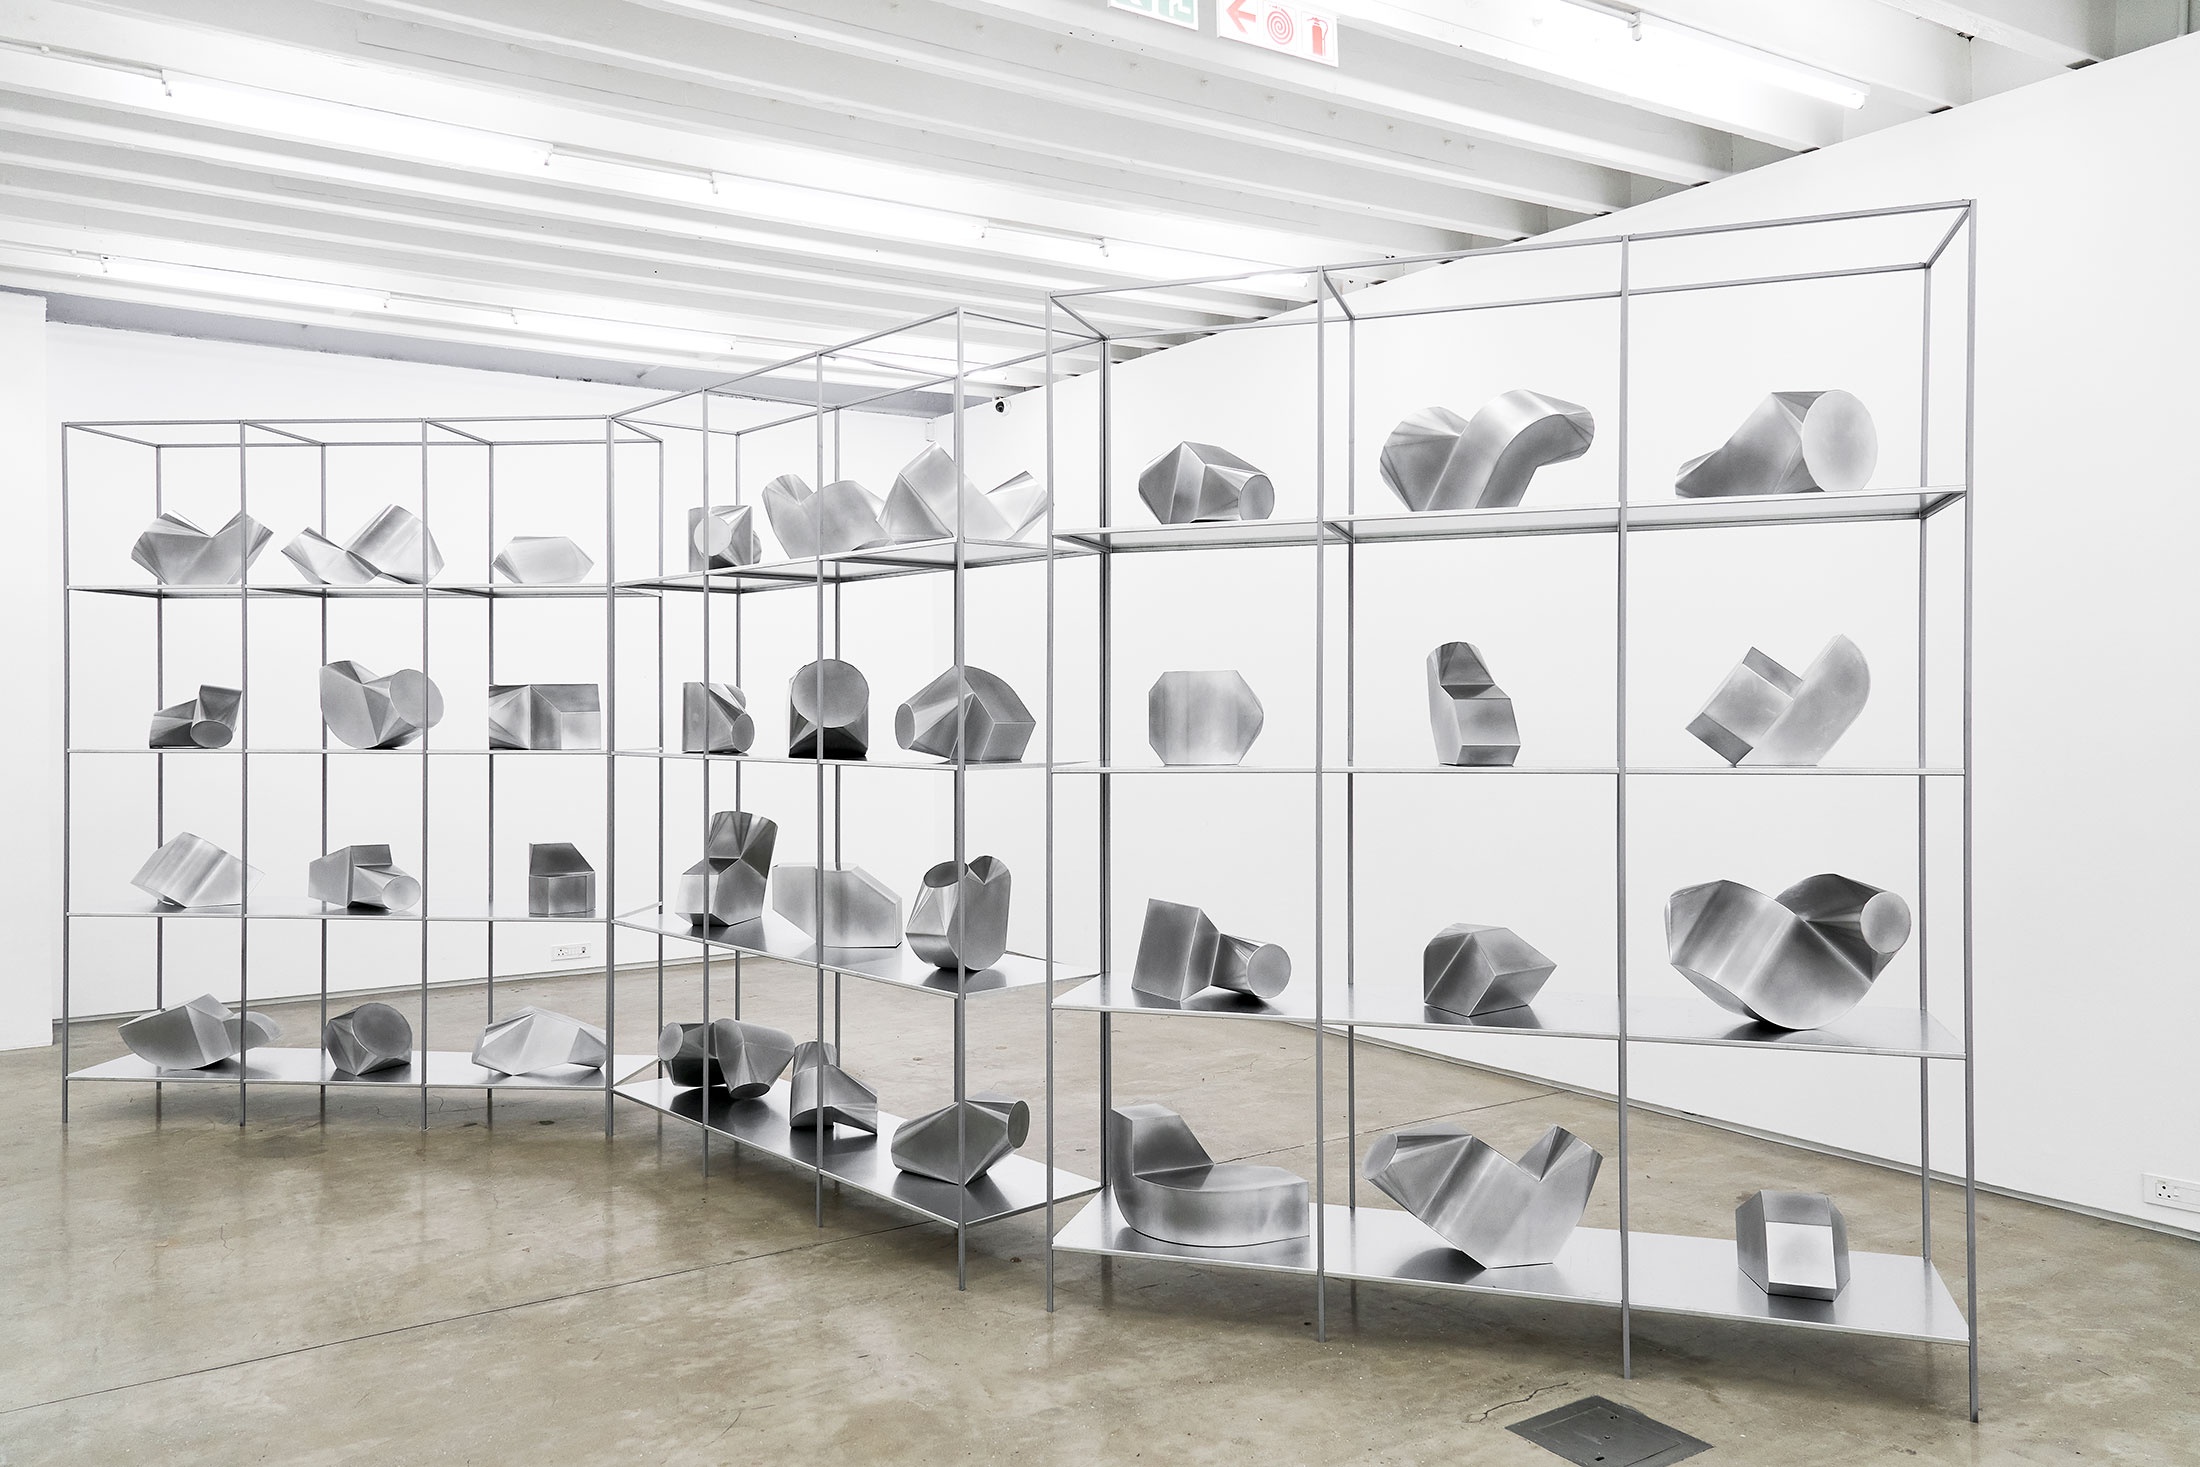 Installation photograph from the 2018 rendition of ‘Parallel Play’ in A4’s Gallery that shows three aluminium shelves with aluminium sculptural forms.
